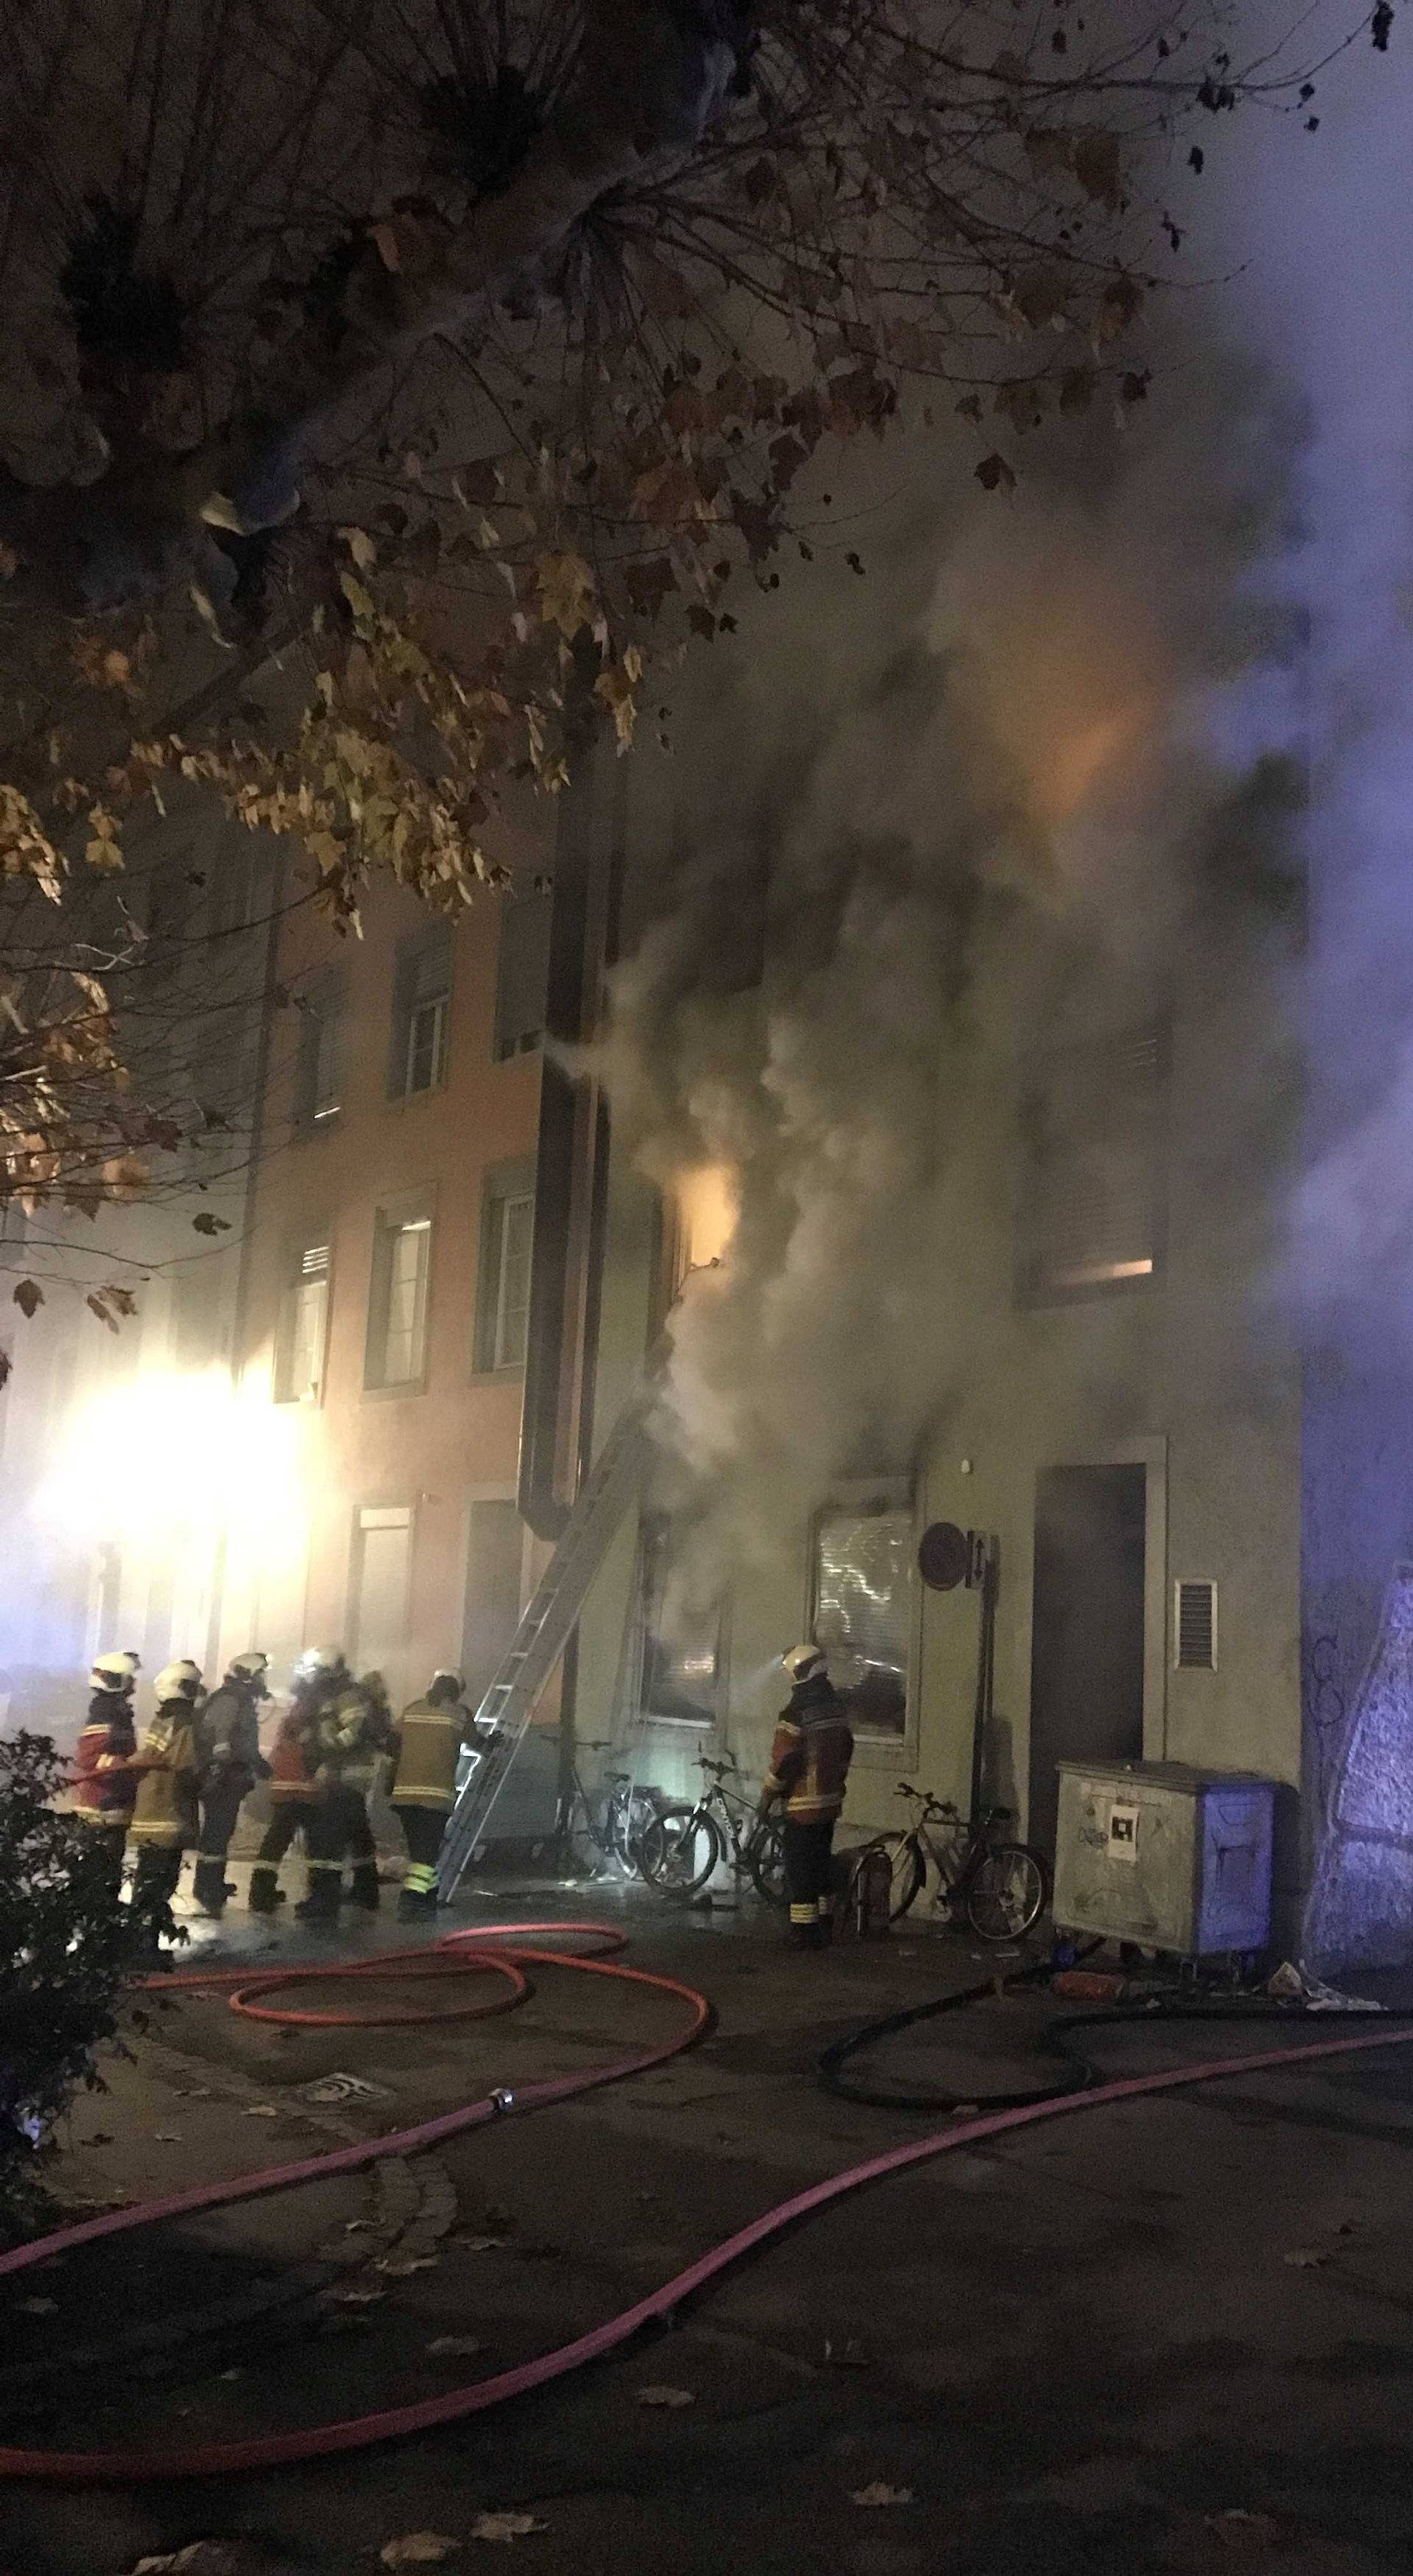 Firefighters are seen in front of a house where six people were killed in an apartment fire early on Monday morning, police said, in Solothurn